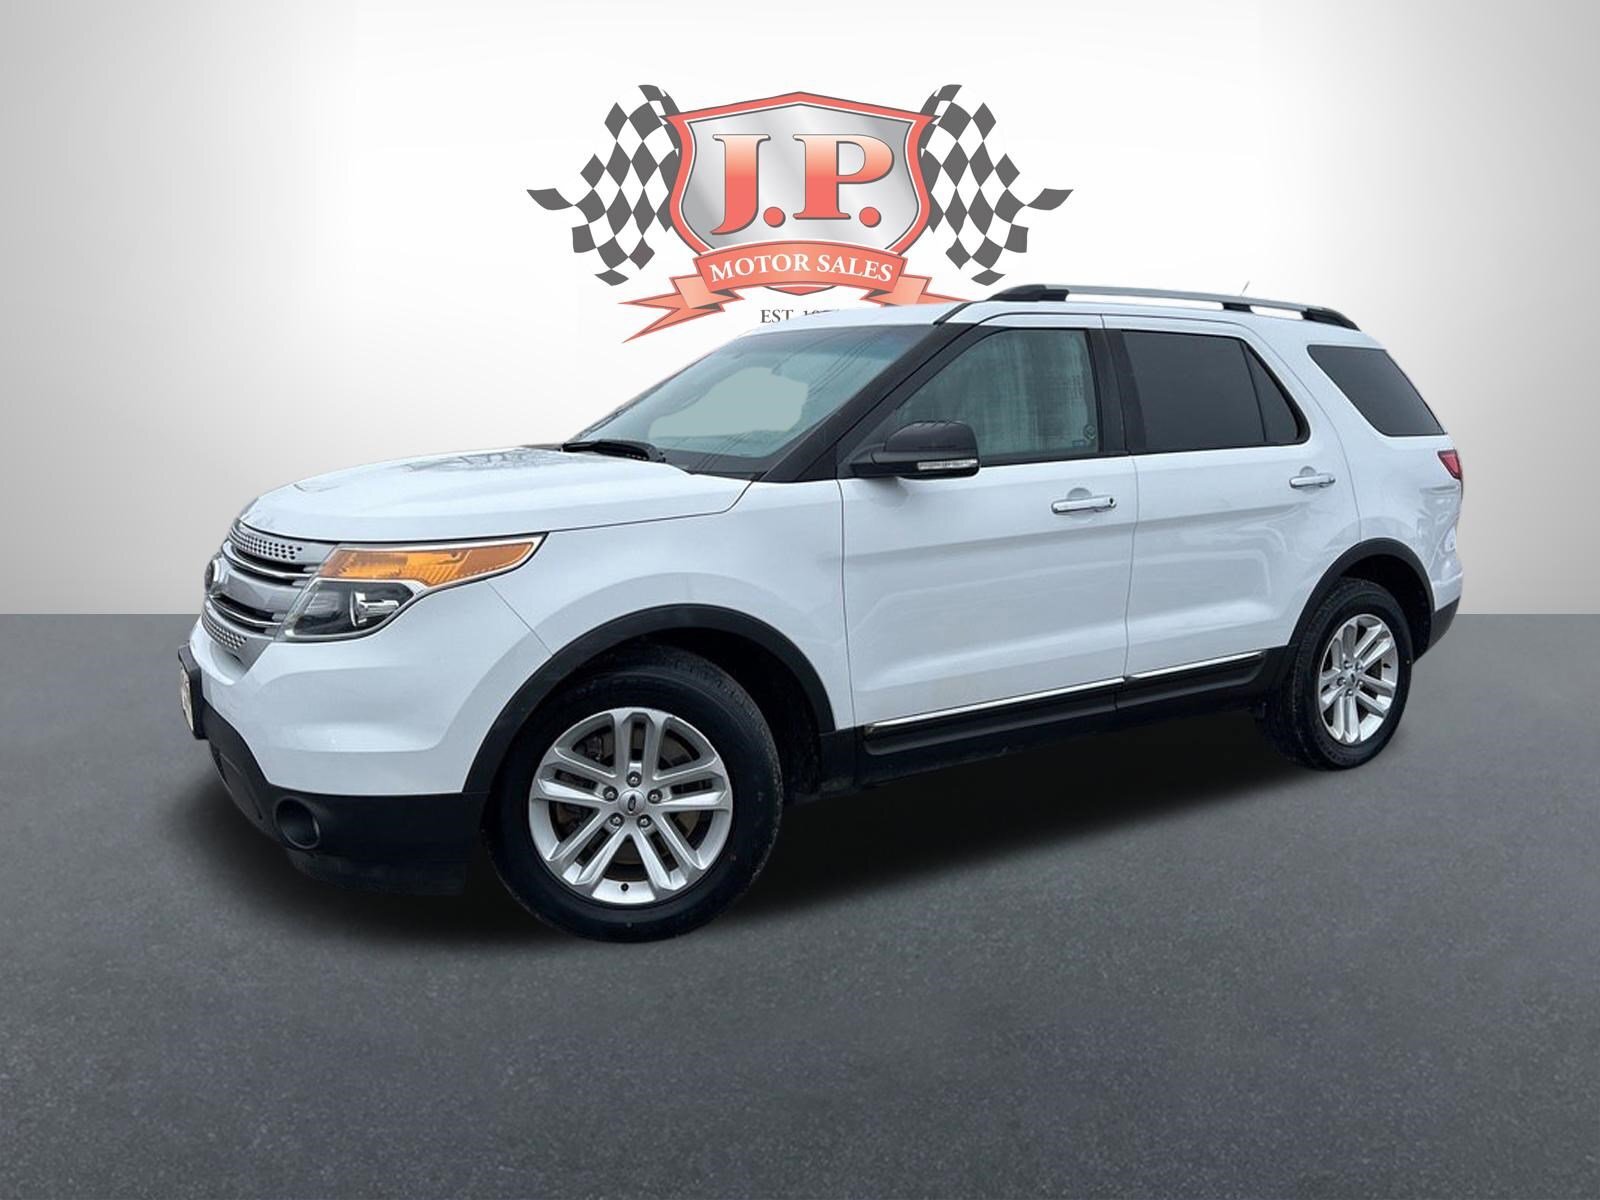 2015 Ford Explorer XLT | 3RD ROW | CAM | BT | HTD SEATS | NO ACCIDENT